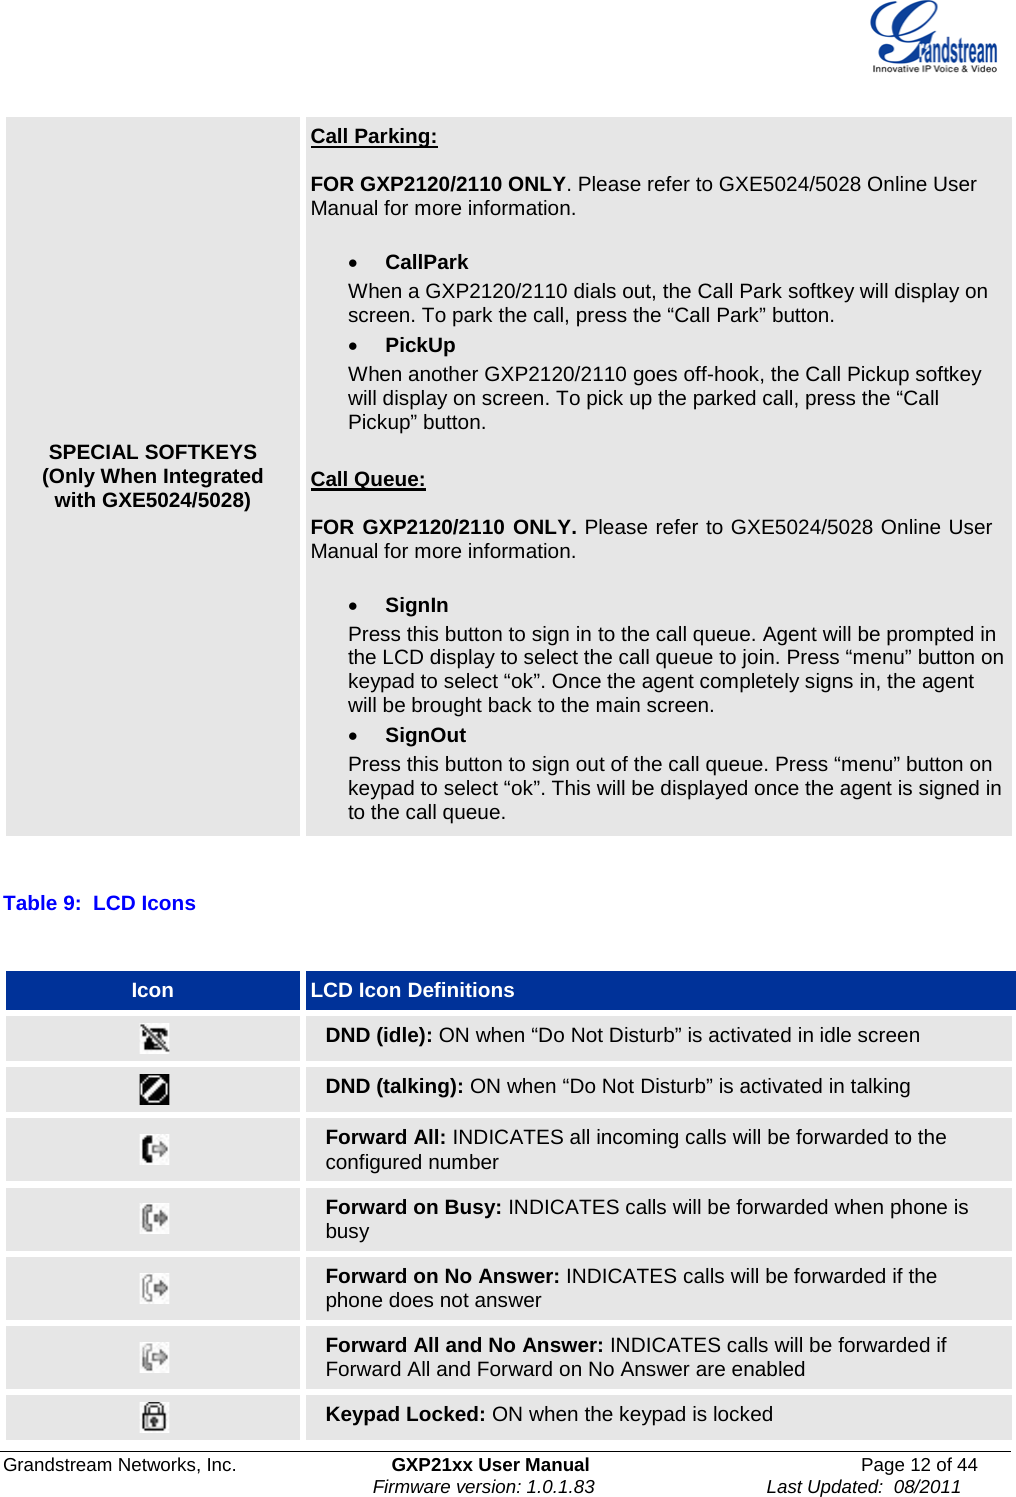  Grandstream Networks, Inc. GXP21xx User Manual Page 12 of 44                                                              Firmware version: 1.0.1.83                                 Last Updated:  08/2011  SPECIAL SOFTKEYS (Only When Integrated with GXE5024/5028) Call Parking:    FOR GXP2120/2110 ONLY. Please refer to GXE5024/5028 Online User Manual for more information.  • CallPark    When a GXP2120/2110 dials out, the Call Park softkey will display on screen. To park the call, press the “Call Park” button.  • PickUp      When another GXP2120/2110 goes off-hook, the Call Pickup softkey will display on screen. To pick up the parked call, press the “Call Pickup” button.   Call Queue:    FOR GXP2120/2110 ONLY. Please refer to GXE5024/5028 Online User Manual for more information.  • SignIn     Press this button to sign in to the call queue. Agent will be prompted in the LCD display to select the call queue to join. Press “menu” button on keypad to select “ok”. Once the agent completely signs in, the agent will be brought back to the main screen. • SignOut      Press this button to sign out of the call queue. Press “menu” button on keypad to select “ok”. This will be displayed once the agent is signed in to the call queue.  Table 9:  LCD Icons  Icon LCD Icon Definitions  DND (idle): ON when “Do Not Disturb” is activated in idle screen  DND (talking): ON when “Do Not Disturb” is activated in talking  Forward All: INDICATES all incoming calls will be forwarded to the configured number  Forward on Busy: INDICATES calls will be forwarded when phone is busy  Forward on No Answer: INDICATES calls will be forwarded if the phone does not answer  Forward All and No Answer: INDICATES calls will be forwarded if Forward All and Forward on No Answer are enabled  Keypad Locked: ON when the keypad is locked 